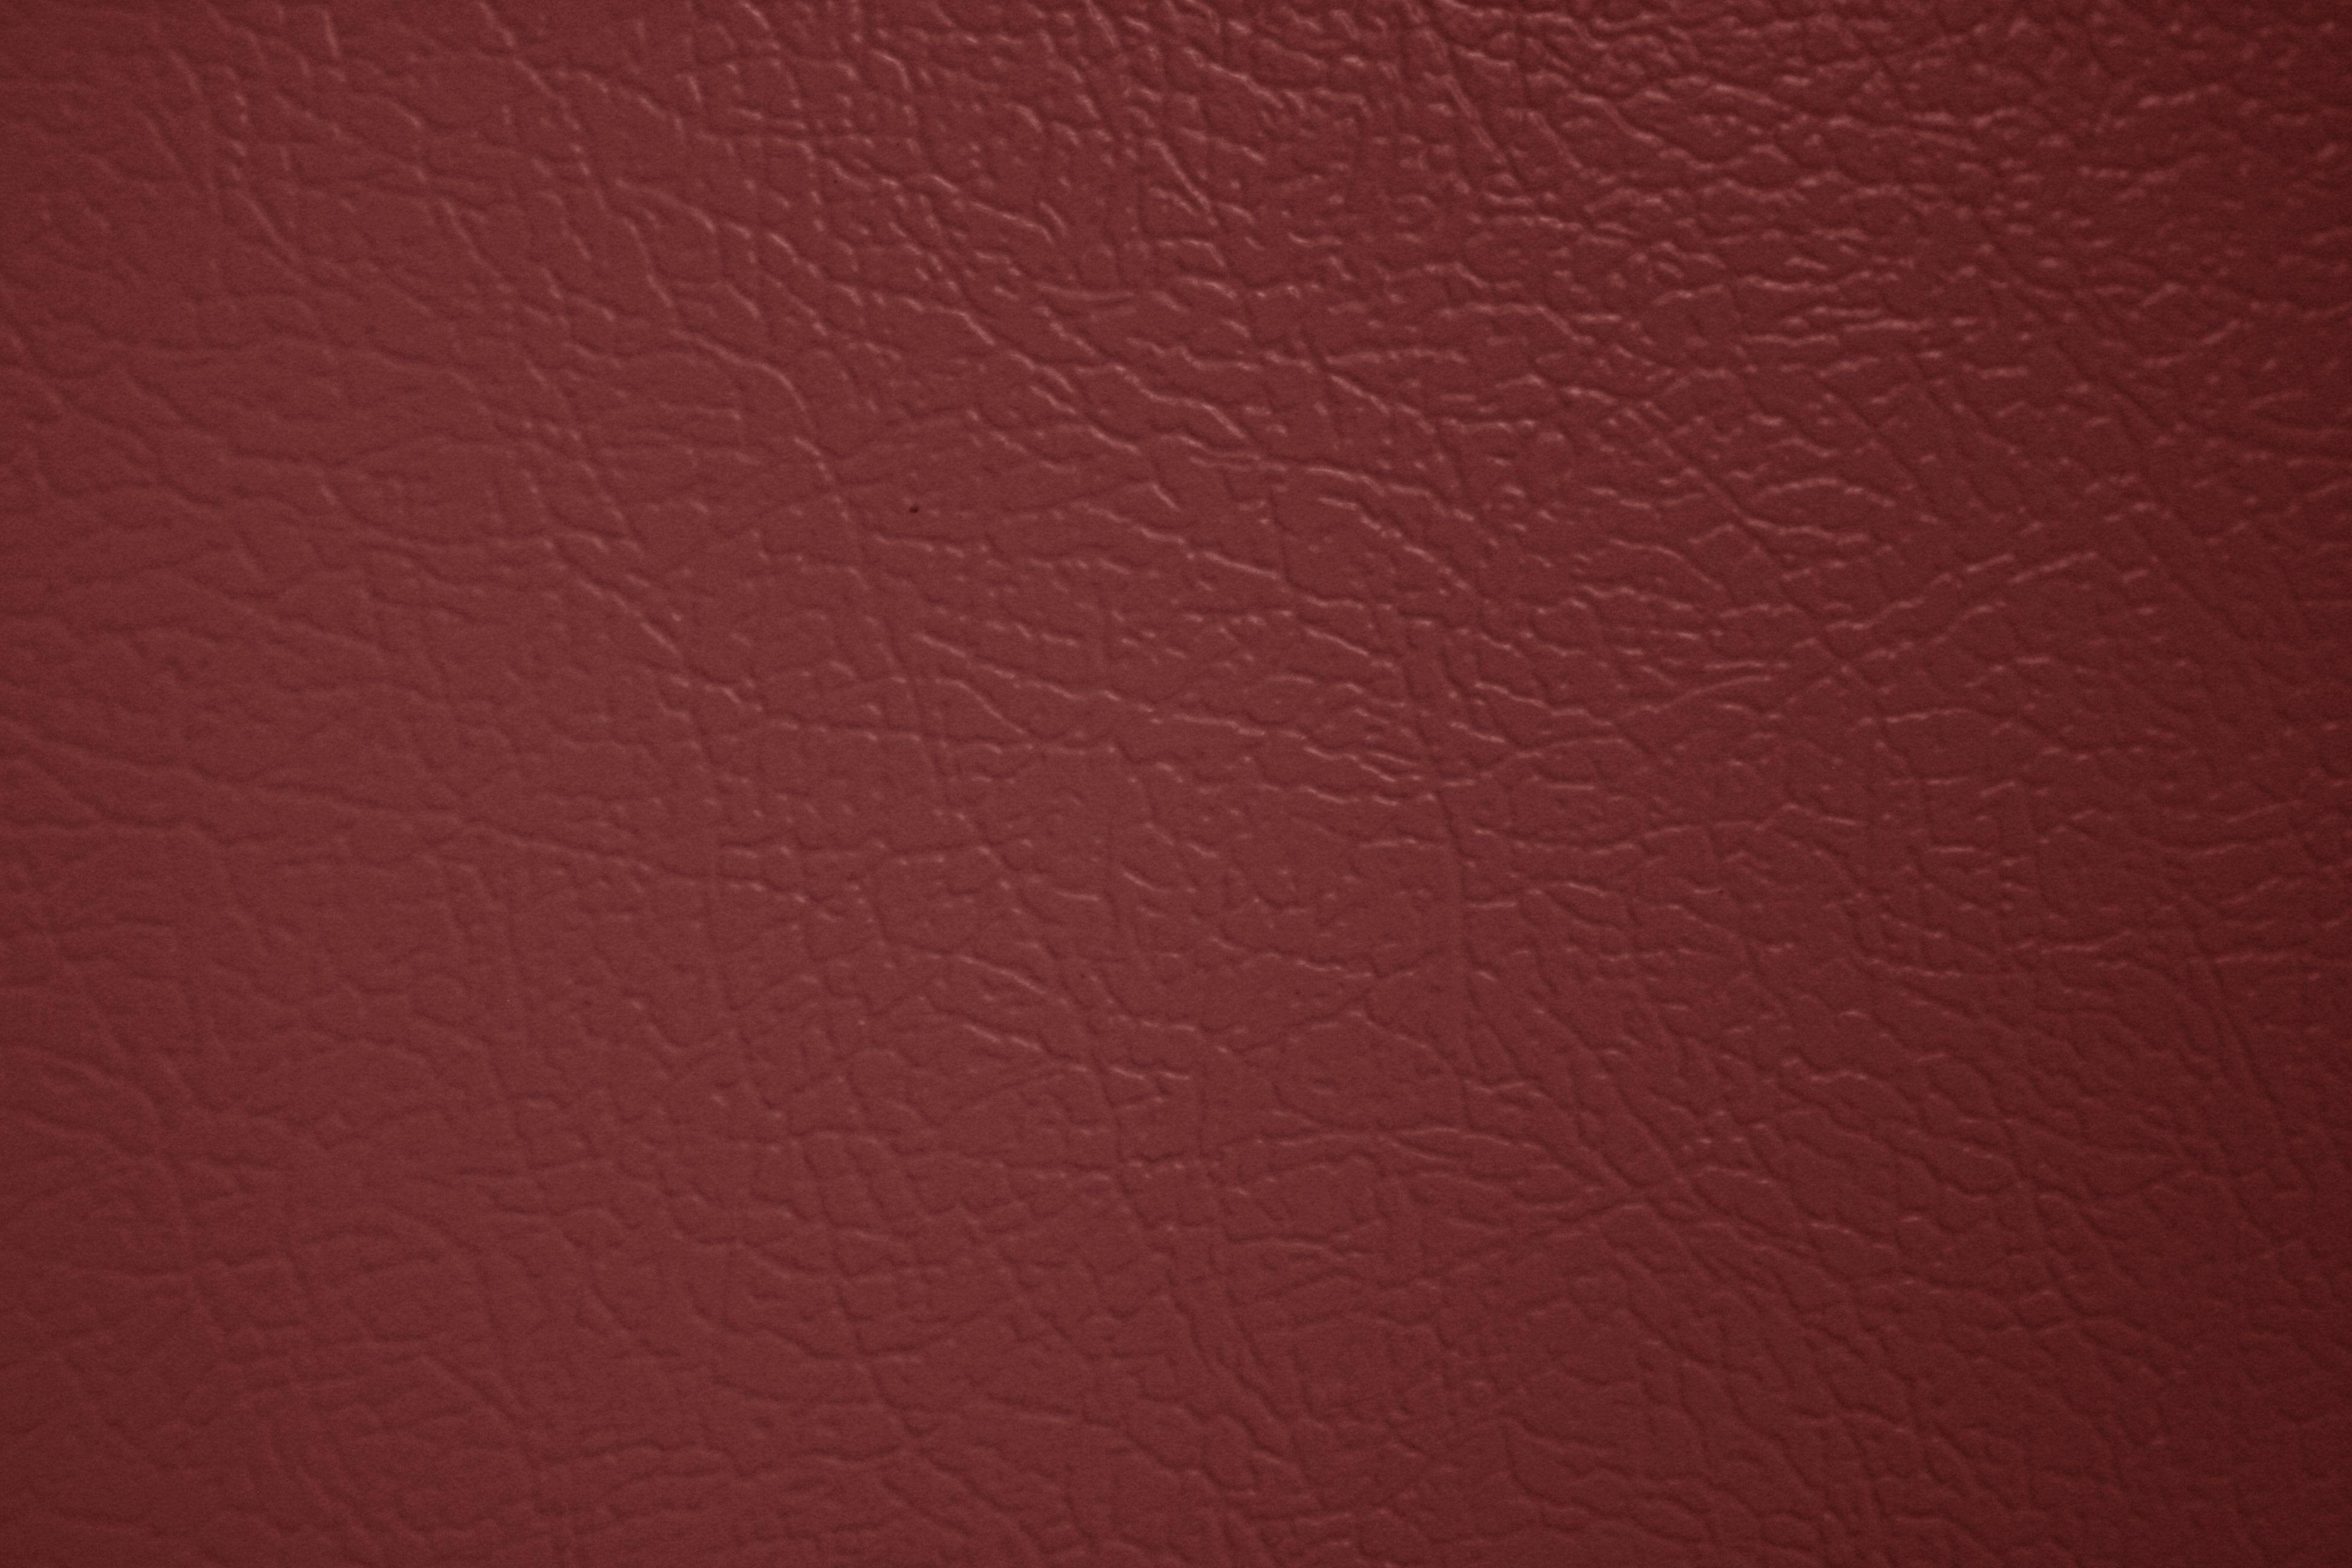 Maroon Faux Leather Texture. LOU- Texture Background